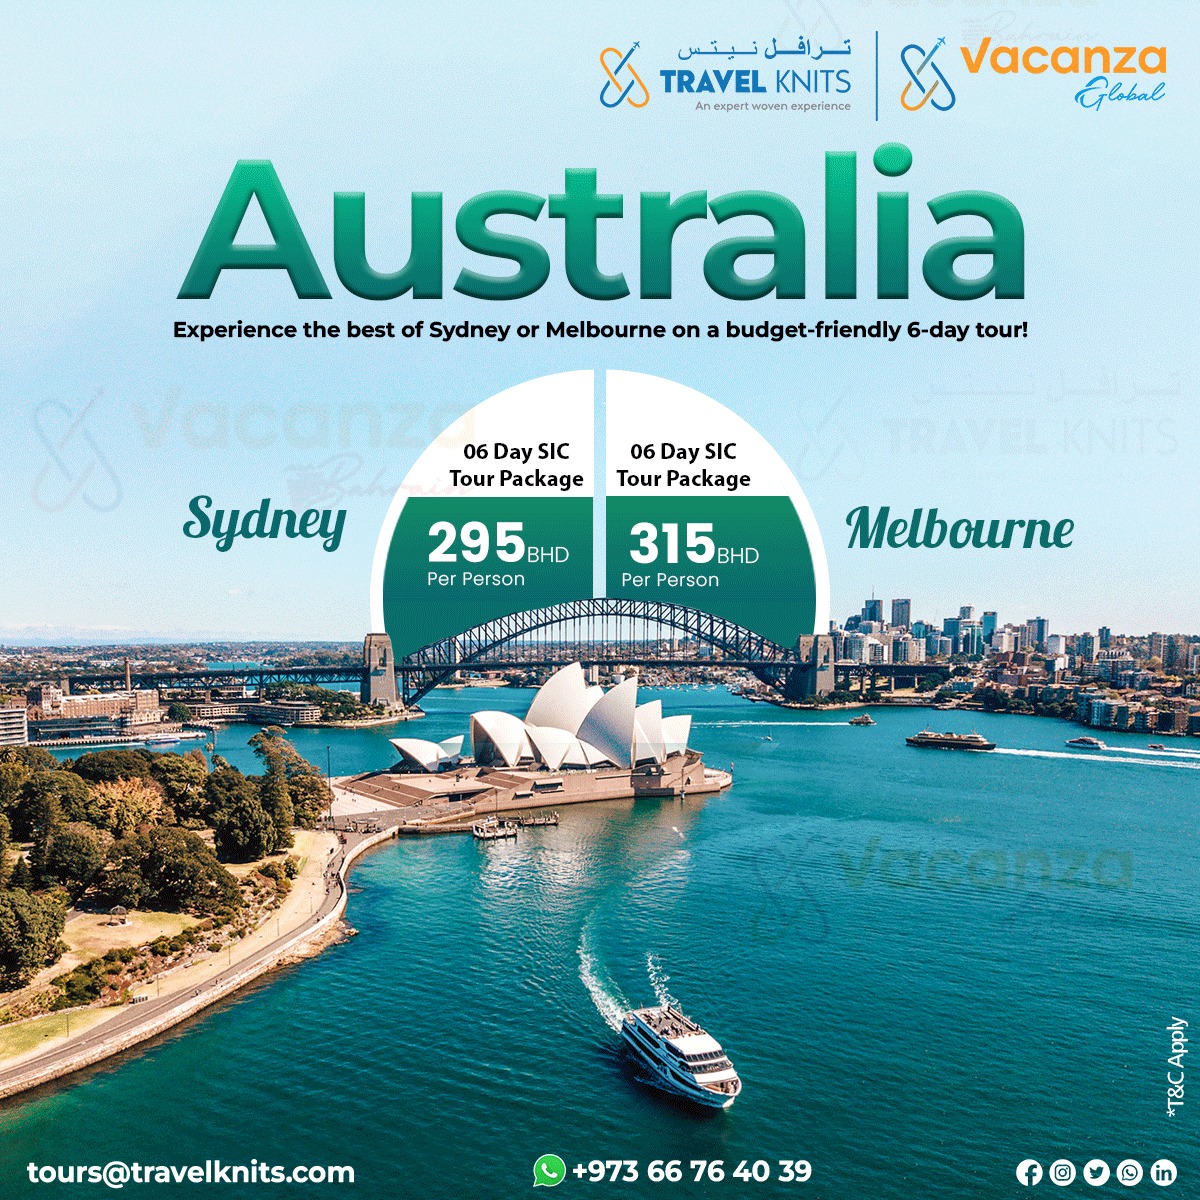 Sydney Package|AustraliaTour Packages - Book honeymoon ,family,adventure tour packages to Australia|Travel Knits												